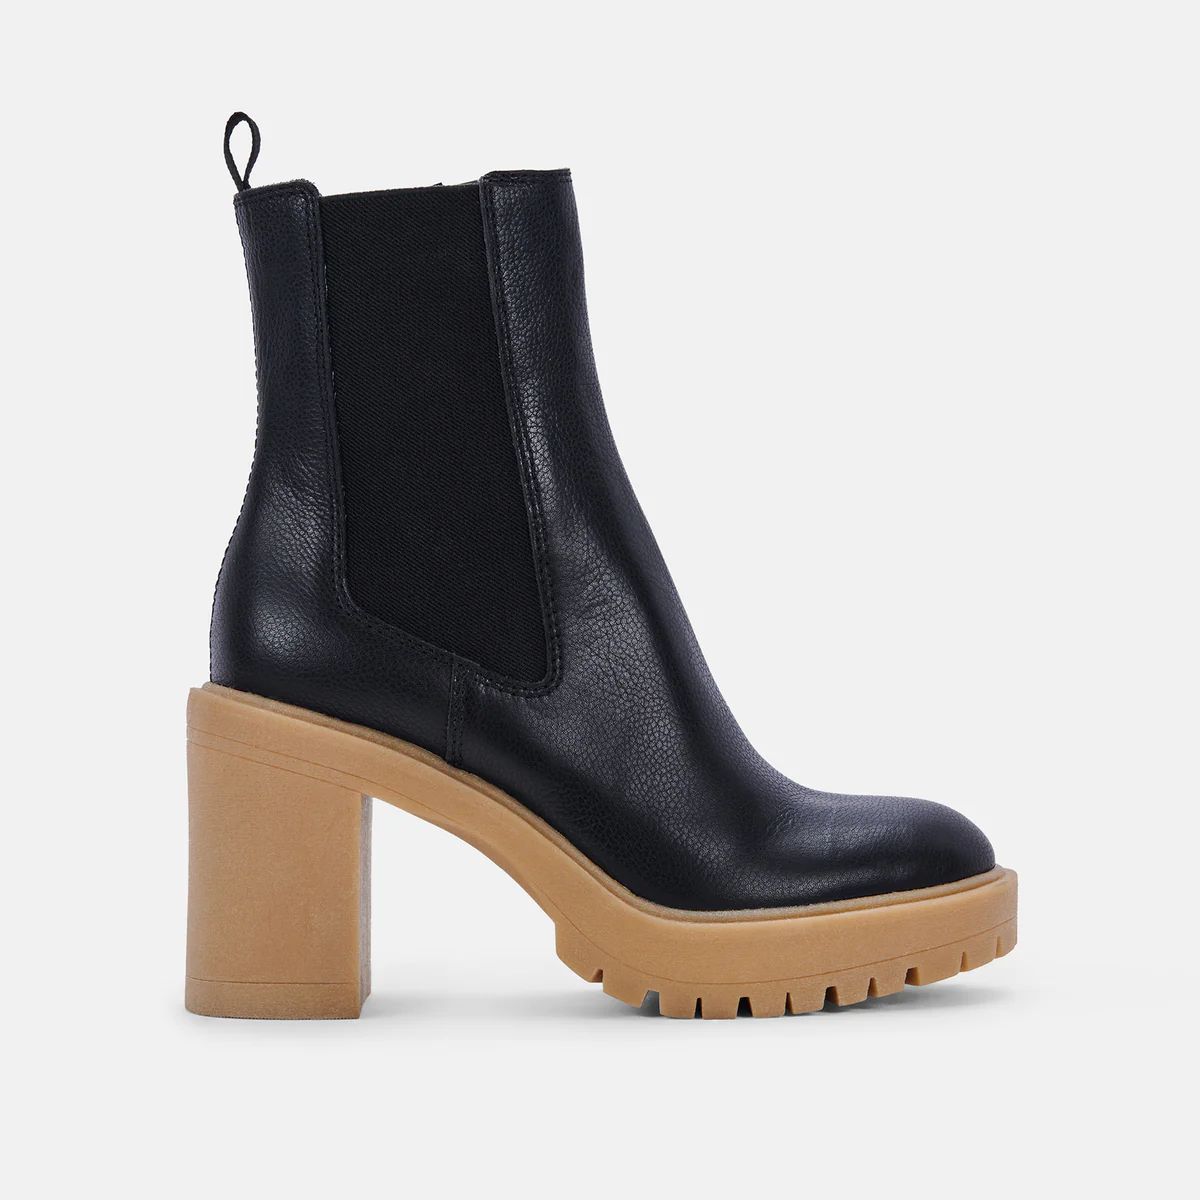 COEN H2O BOOTS BLACK LEATHER | DolceVita.com